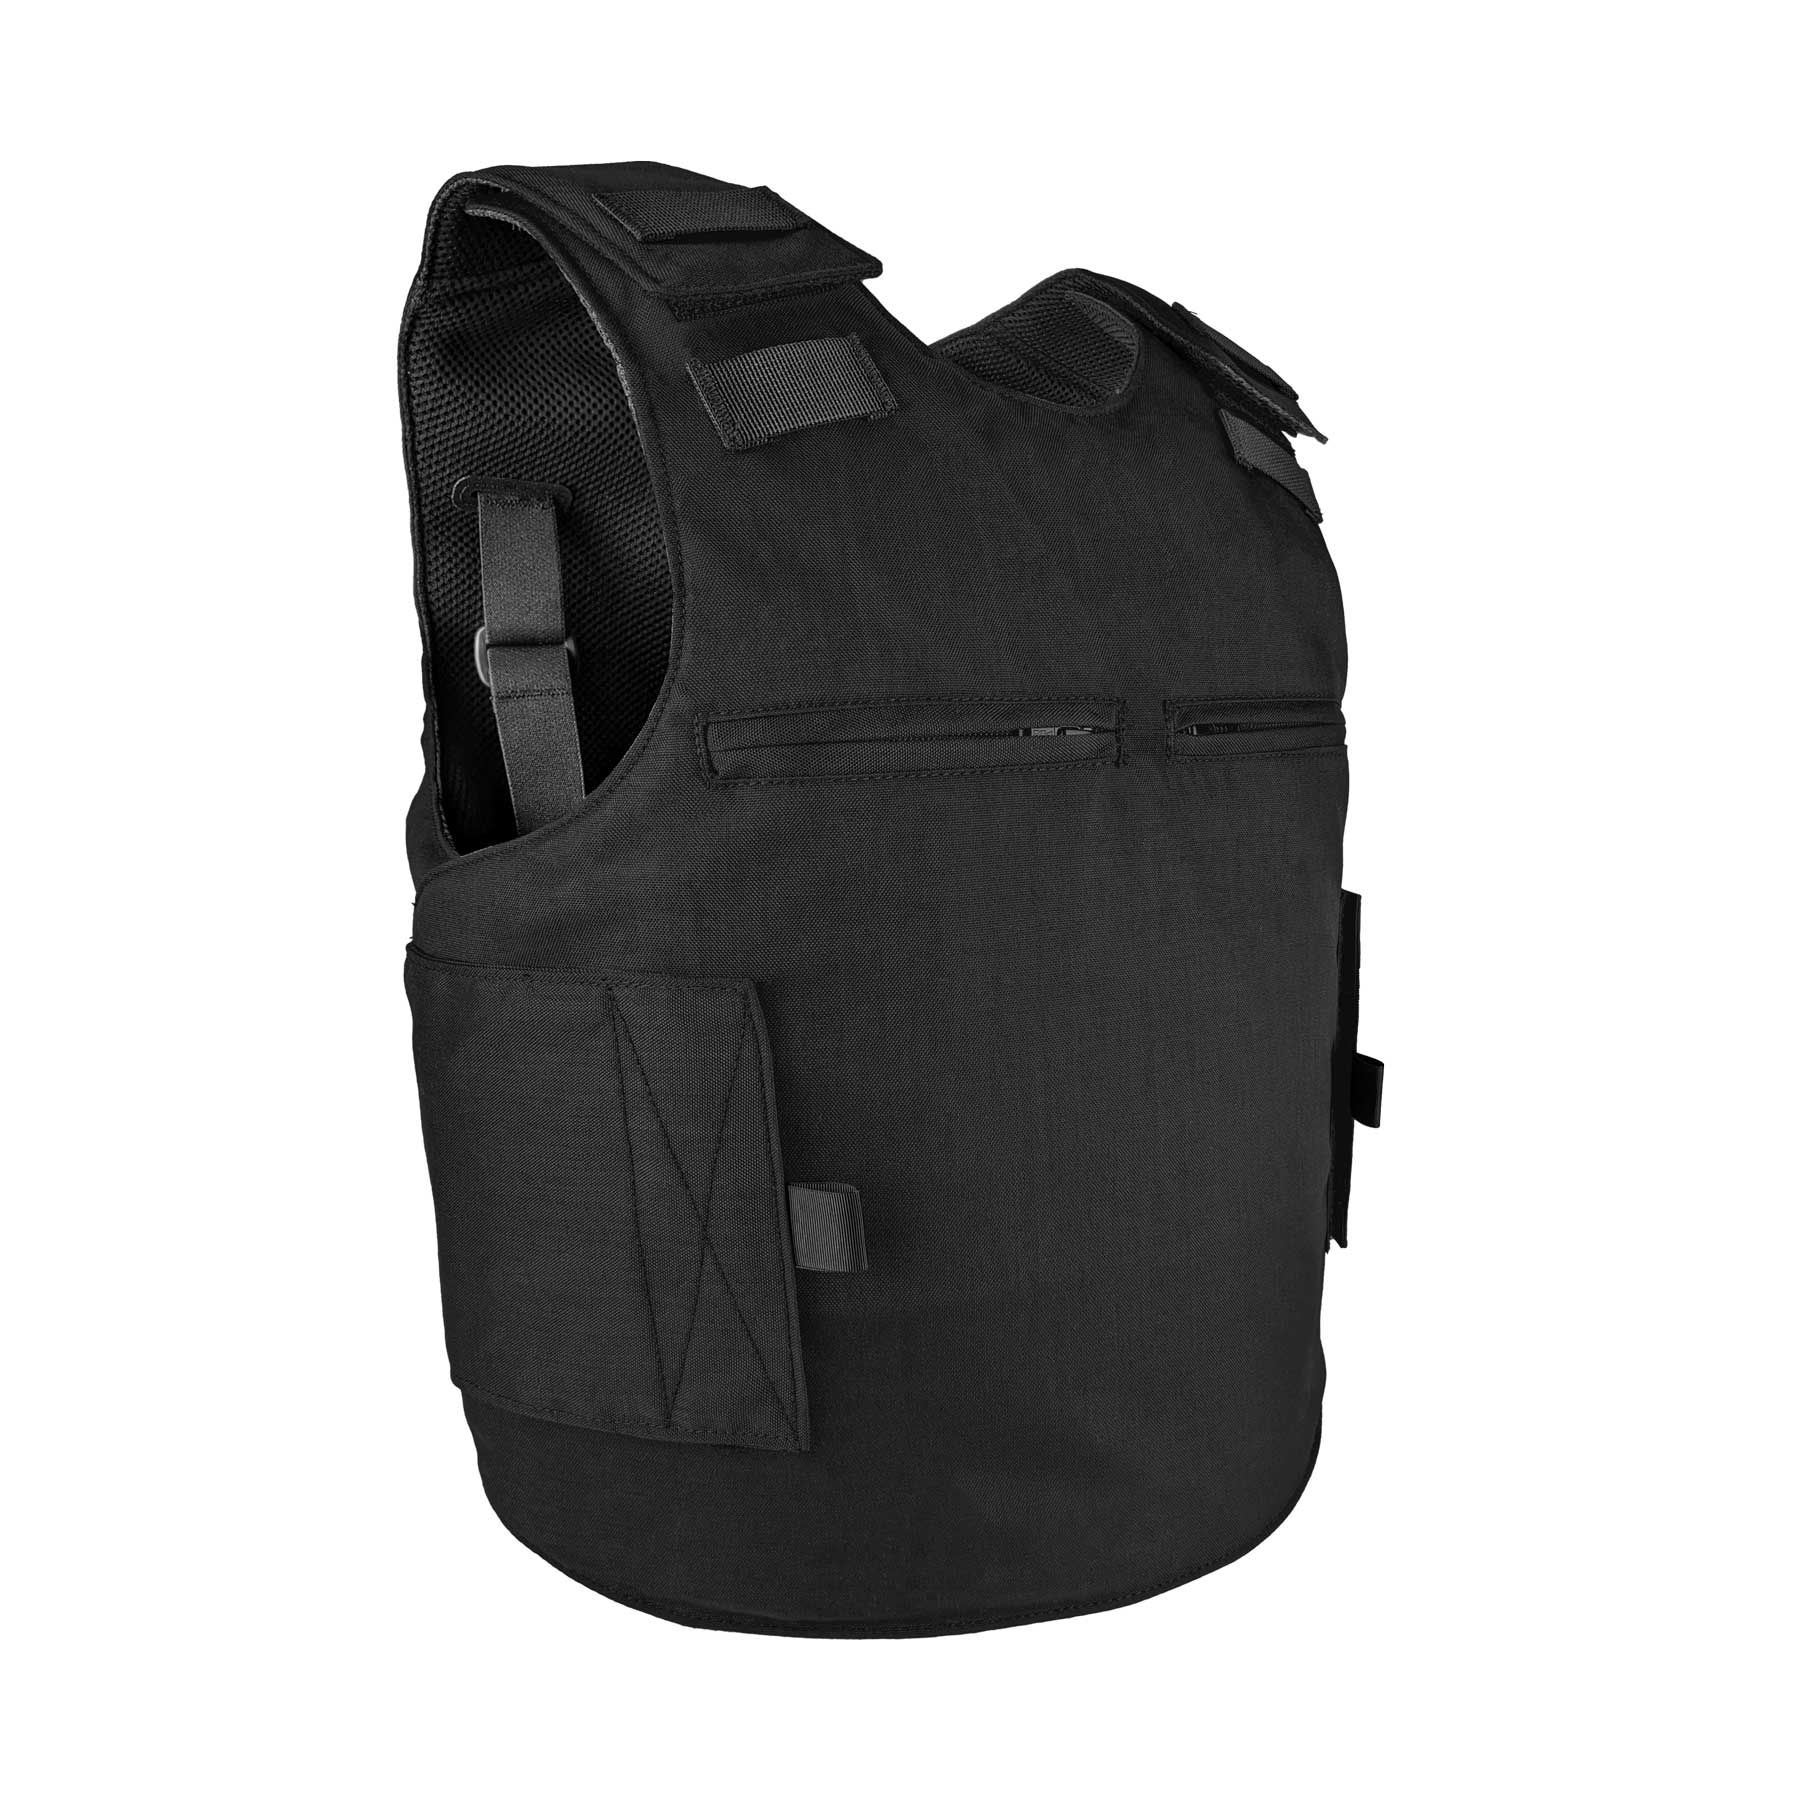 Cheveyo™ Clean Front Carrier, ultra-lightweight | PRE Labs Inc.